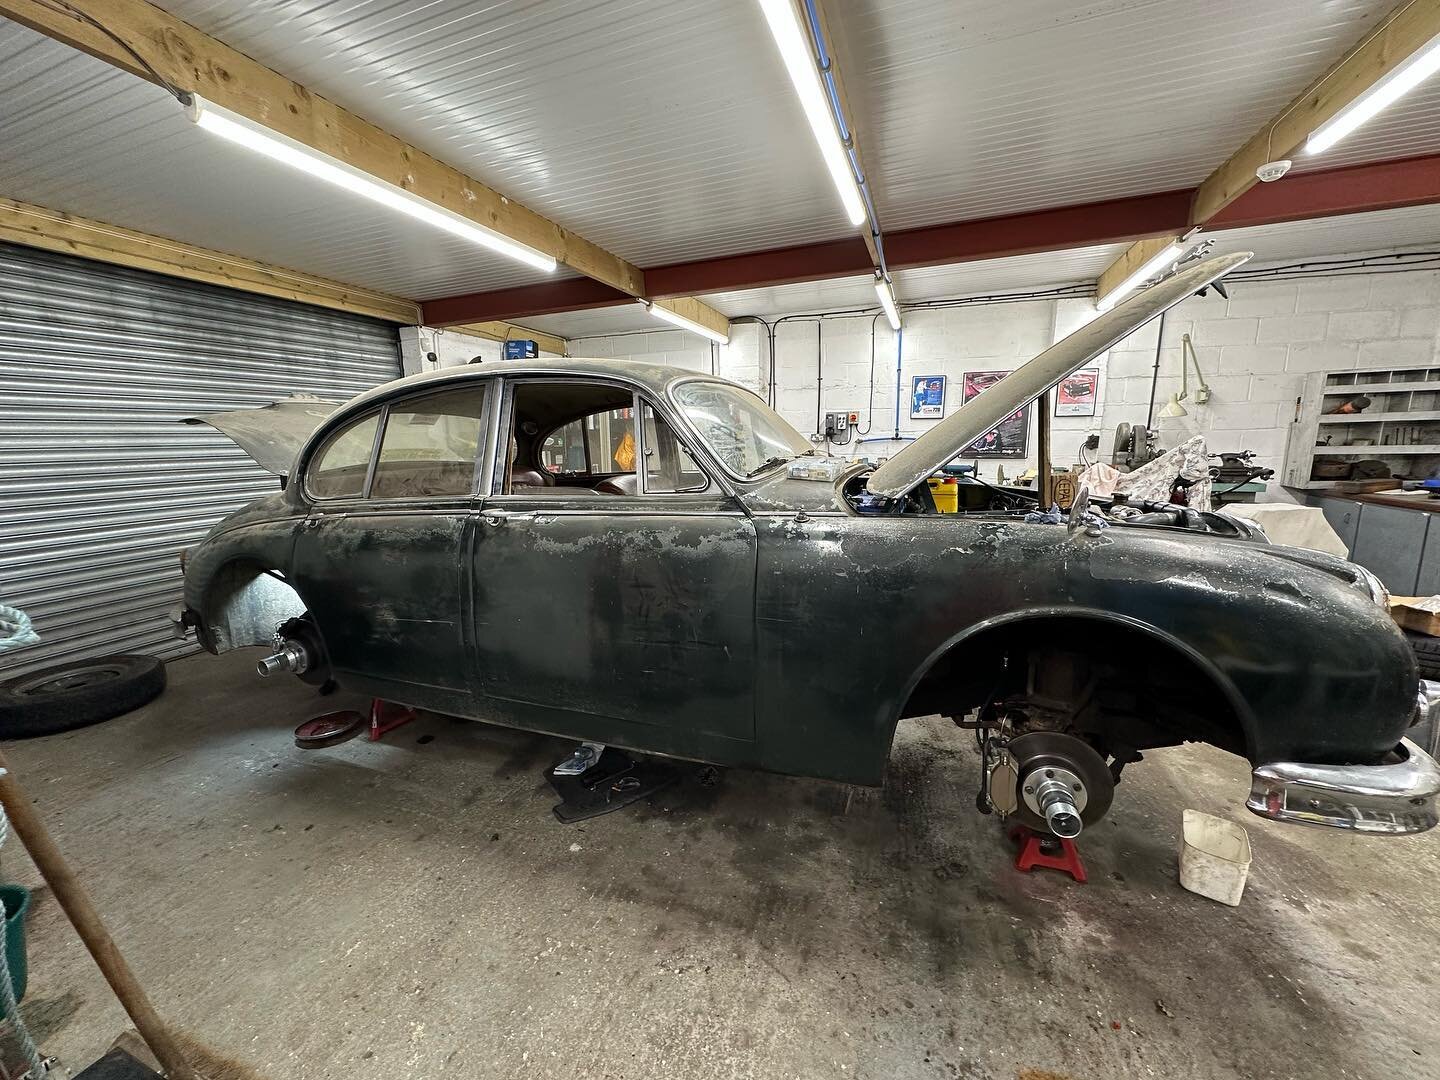 A gorgeous MK2 Jaguar nearing the end of a  gentle recommissioning after some years stored away. We have overhauled the brakes and fuel system amongst other works. #driveittoday #villagegarage #mk2jags #classicjaguar #funstuff #putatigerinyourtank